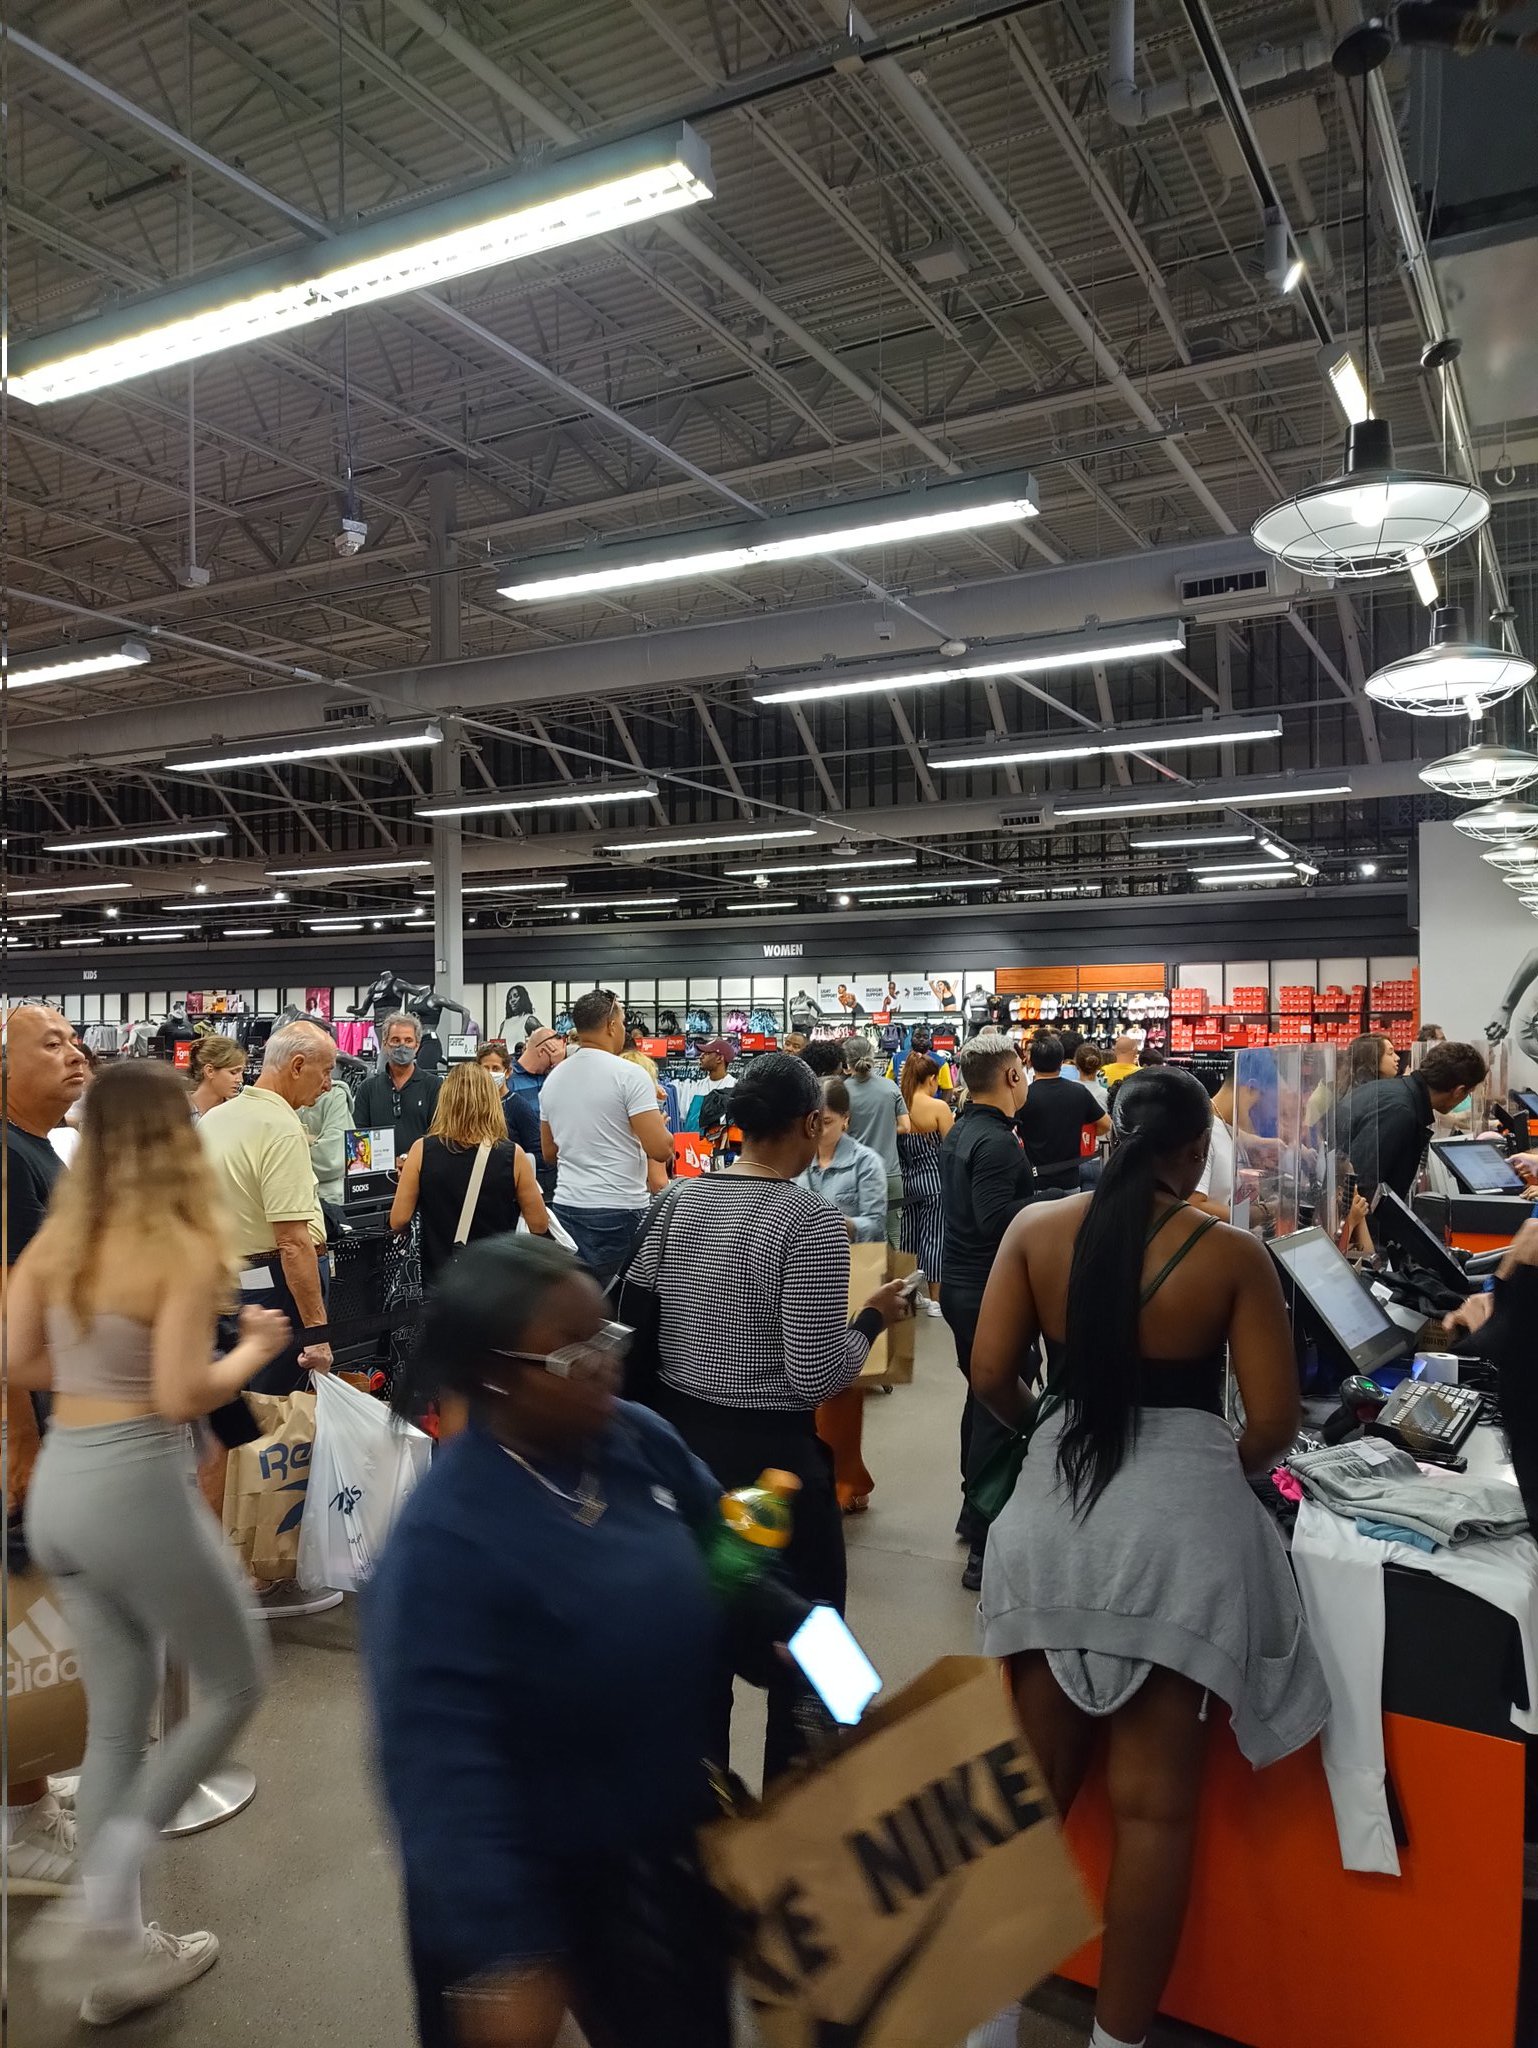 Sawgrass Mills - Shop at Over 350 Stores near Fort Lauderdale, FL